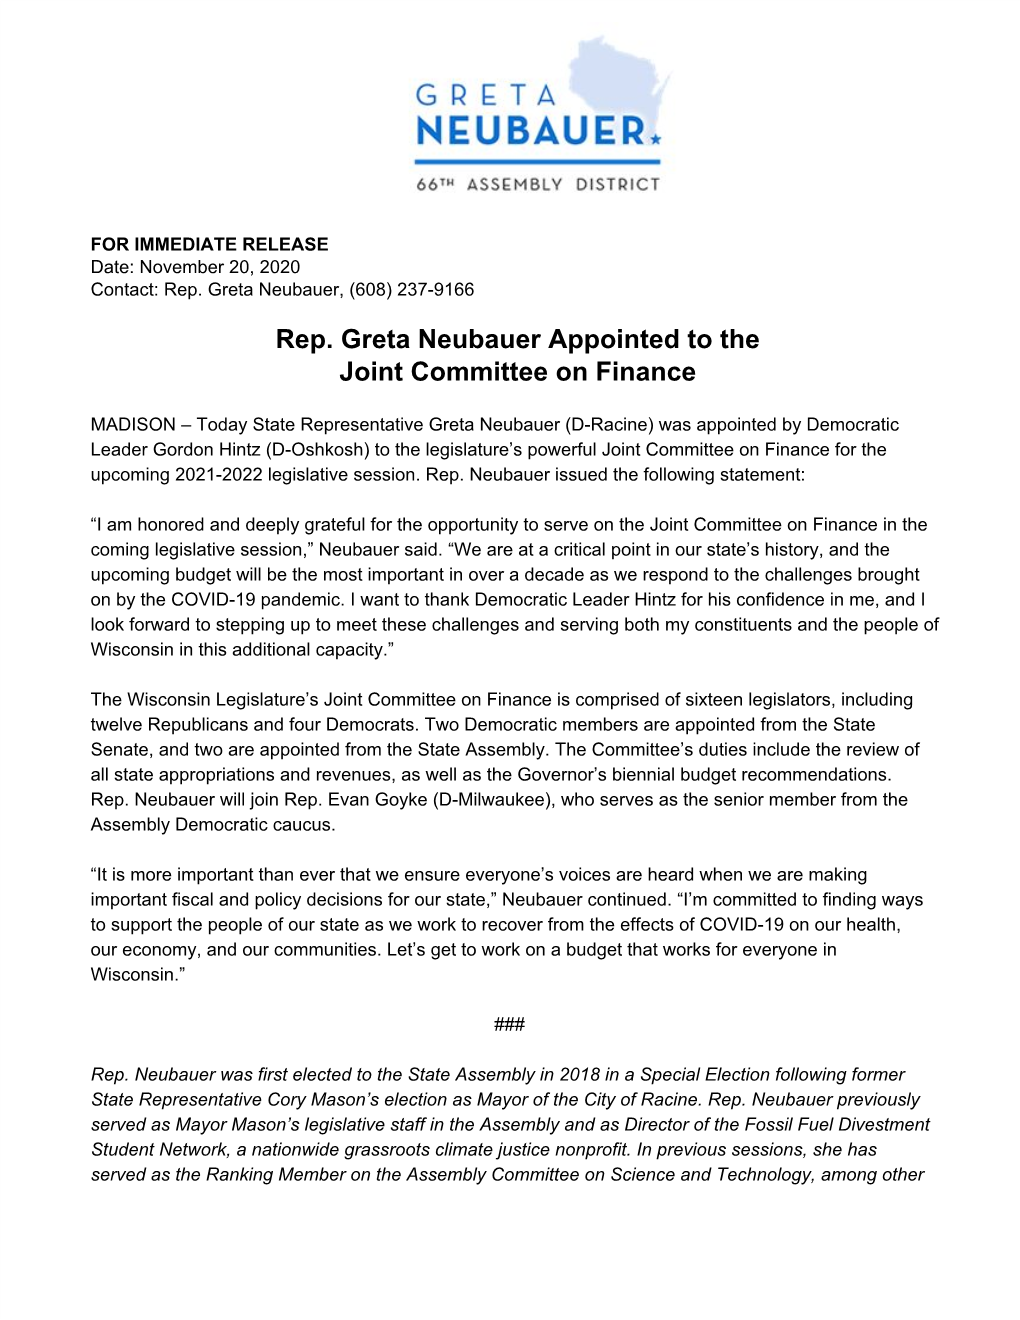 Rep. Greta Neubauer Appointed to the Joint Committee on Finance